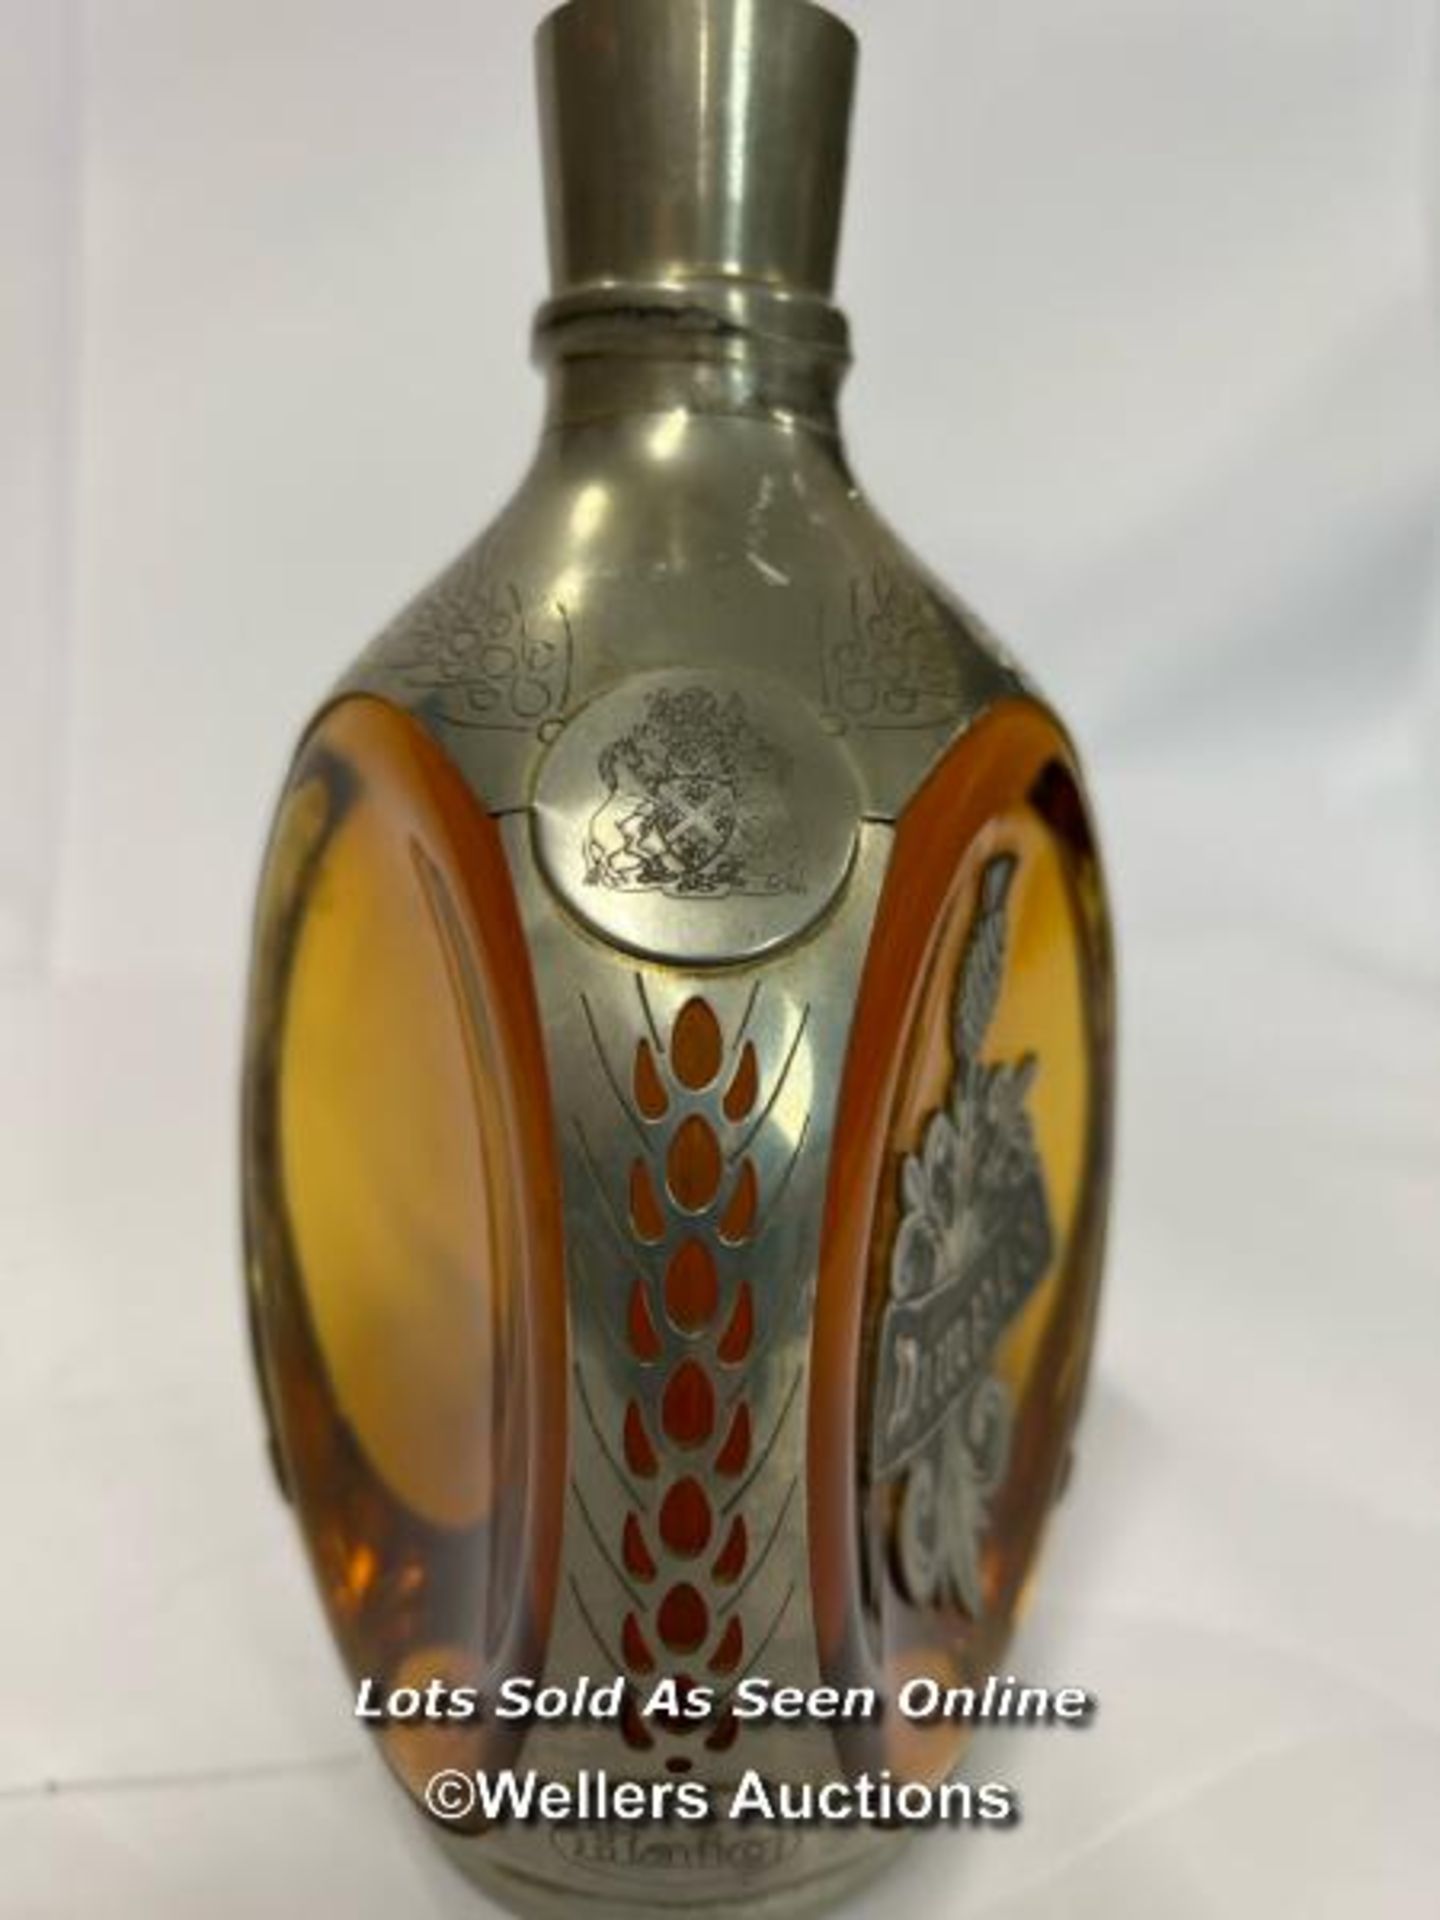 Dimple Haig 12yr whisky in decorative pewter bottle (opened) with a bottle of Dimple 15yr whisky, - Bild 3 aus 5